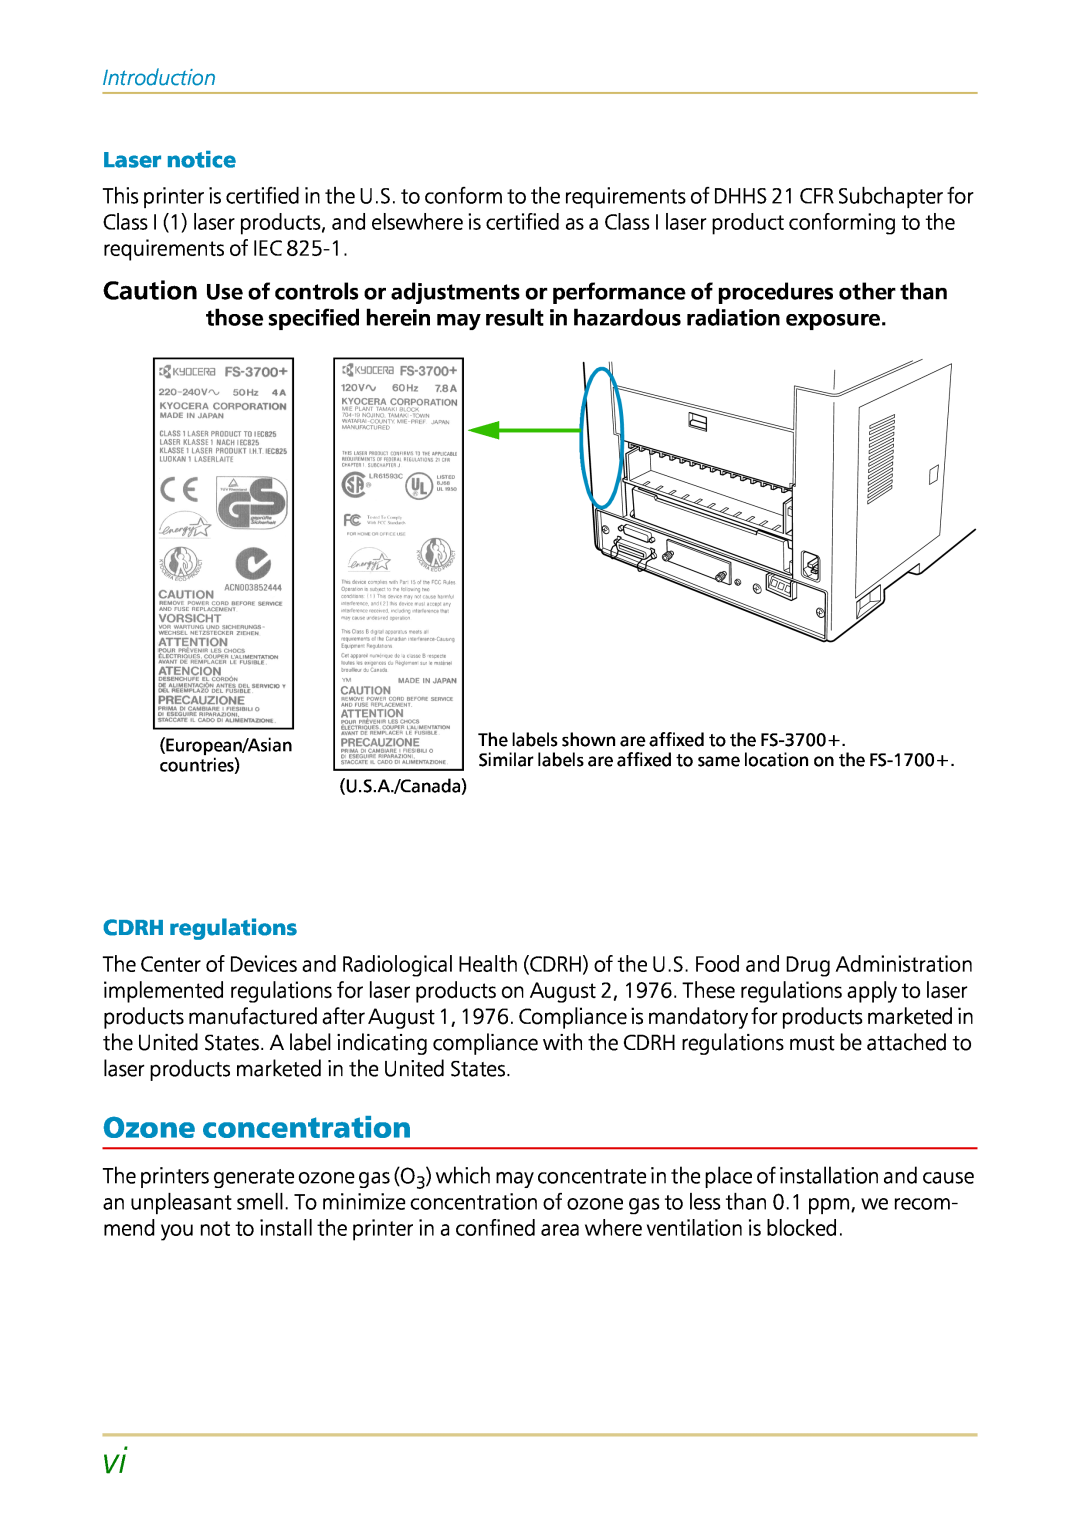 Kyocera FS-1700 user manual Ozone concentration, Introduction, Laser notice, CDRH regulations 